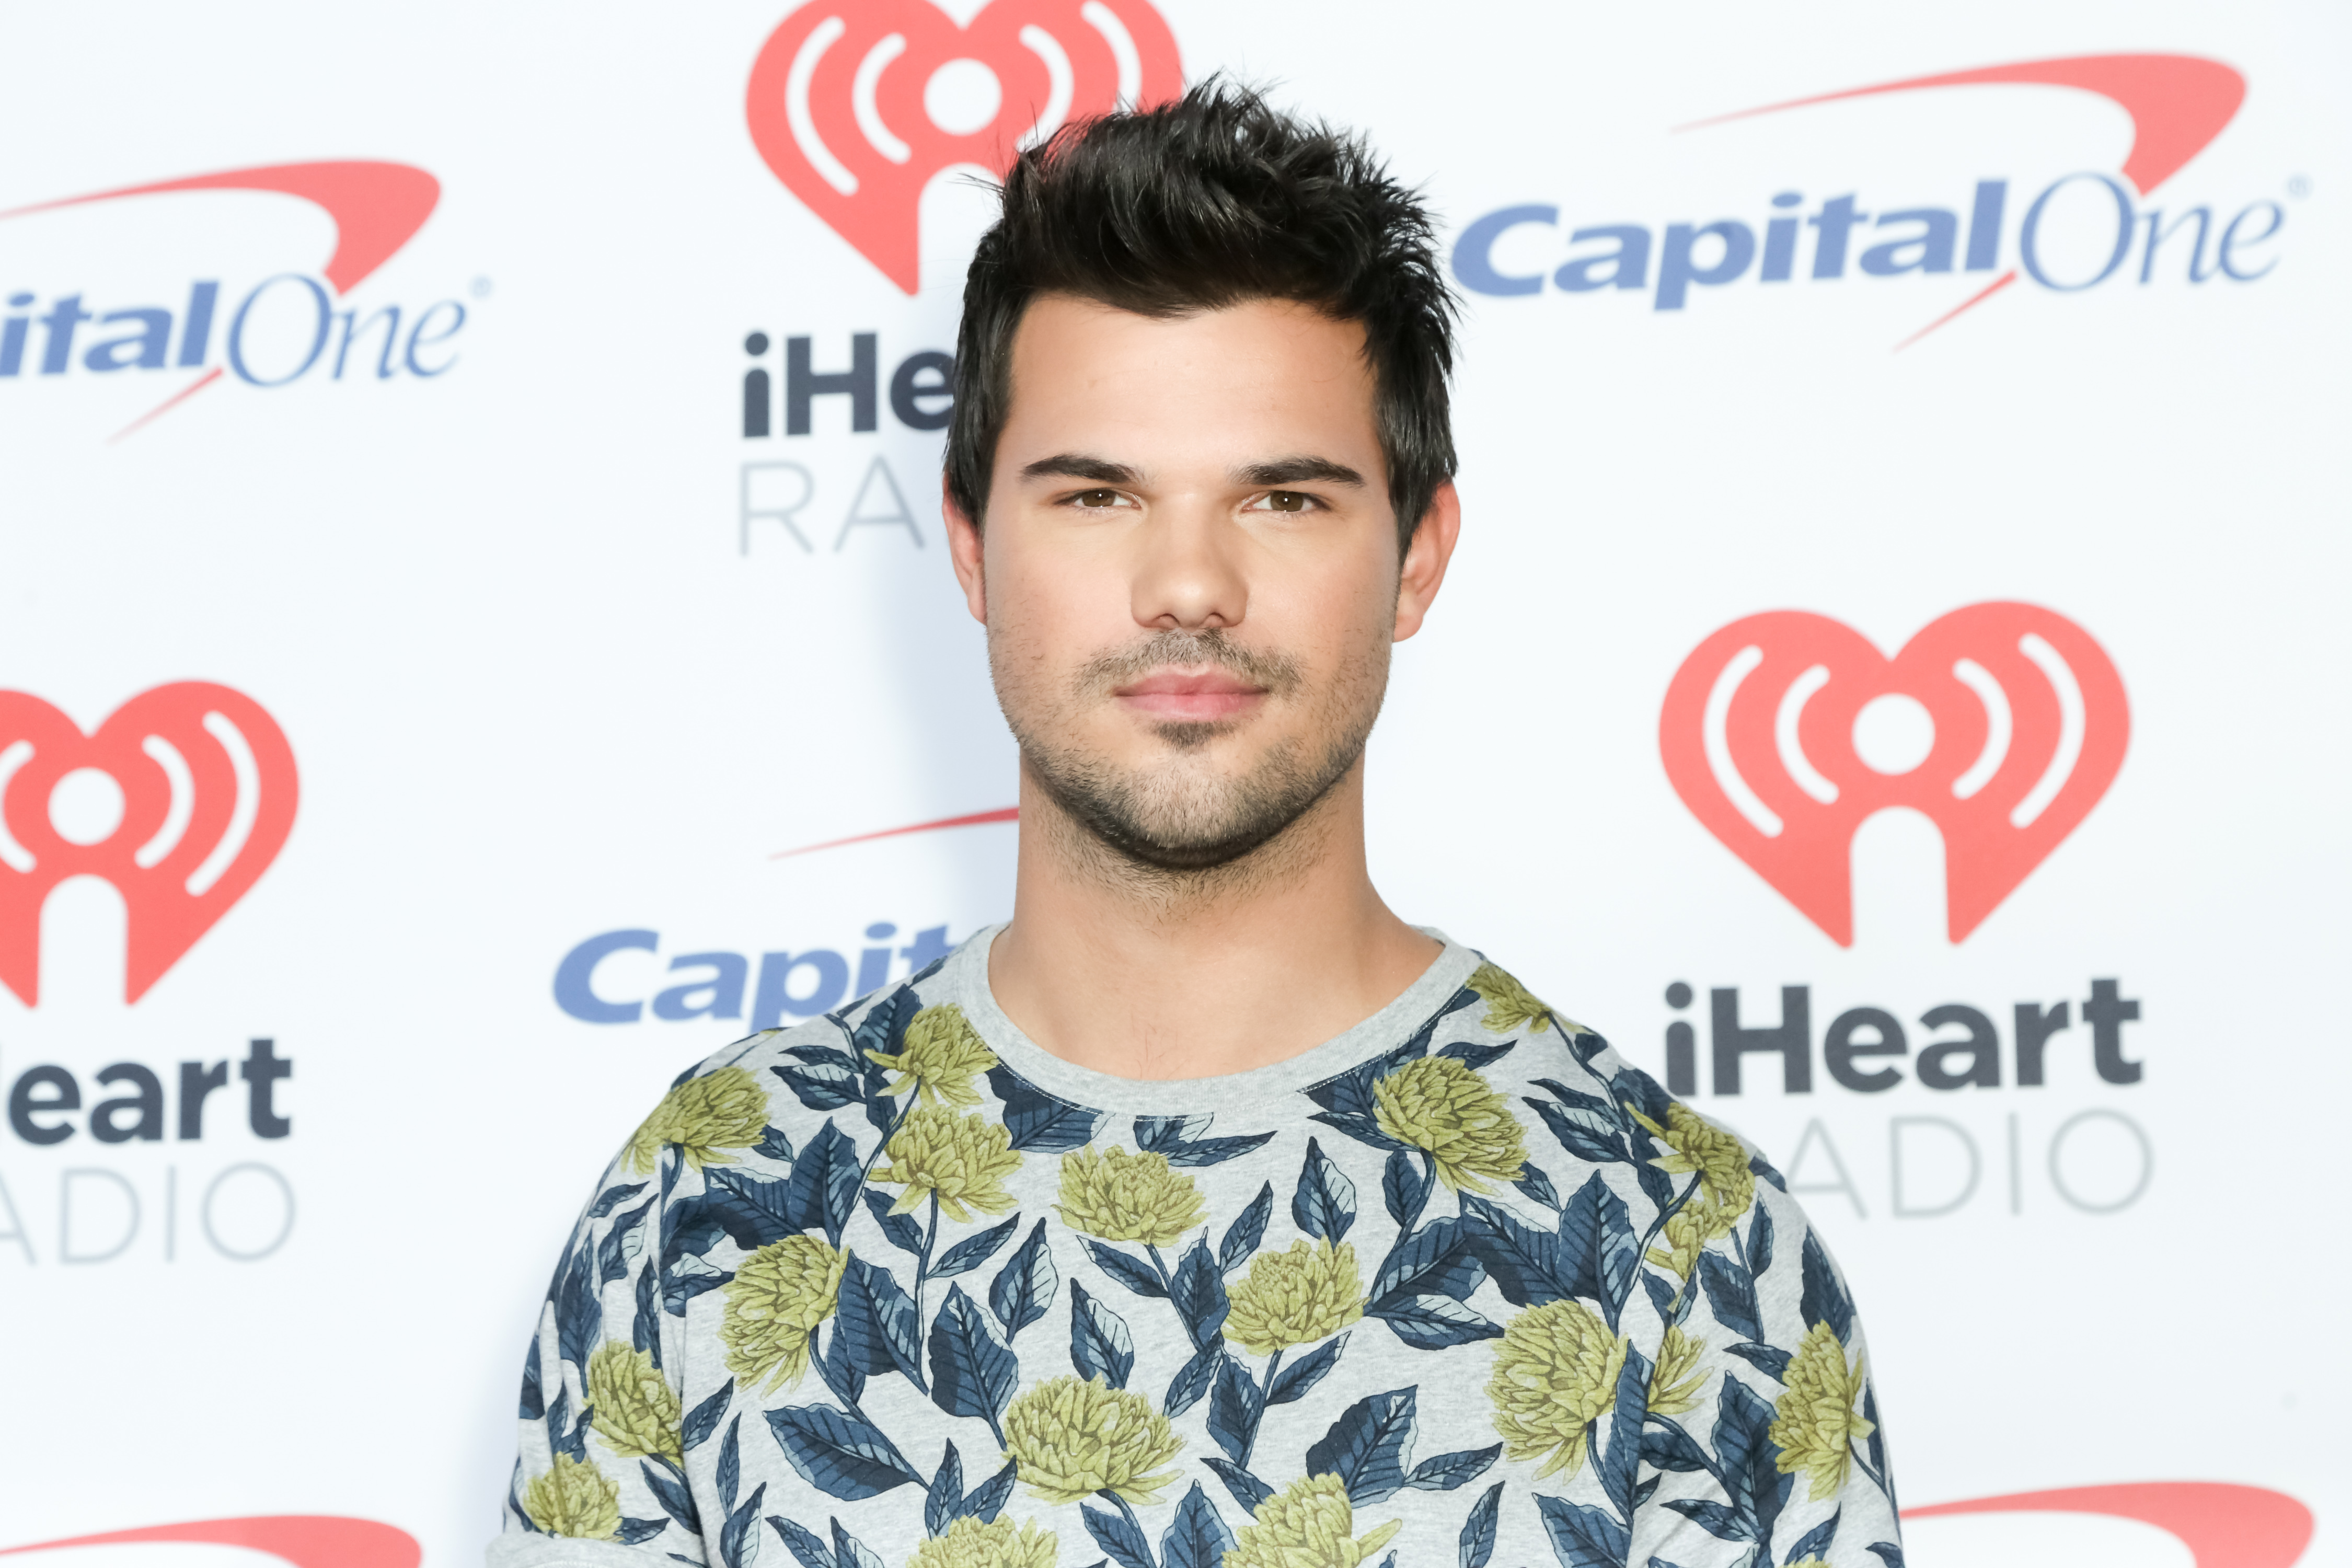 Taylor Lautner attends the 2017 iHeartRadio Music Festival at T-Mobile Arena, on September 23, 2017, in Las Vegas, Nevada. | Source: Getty Images